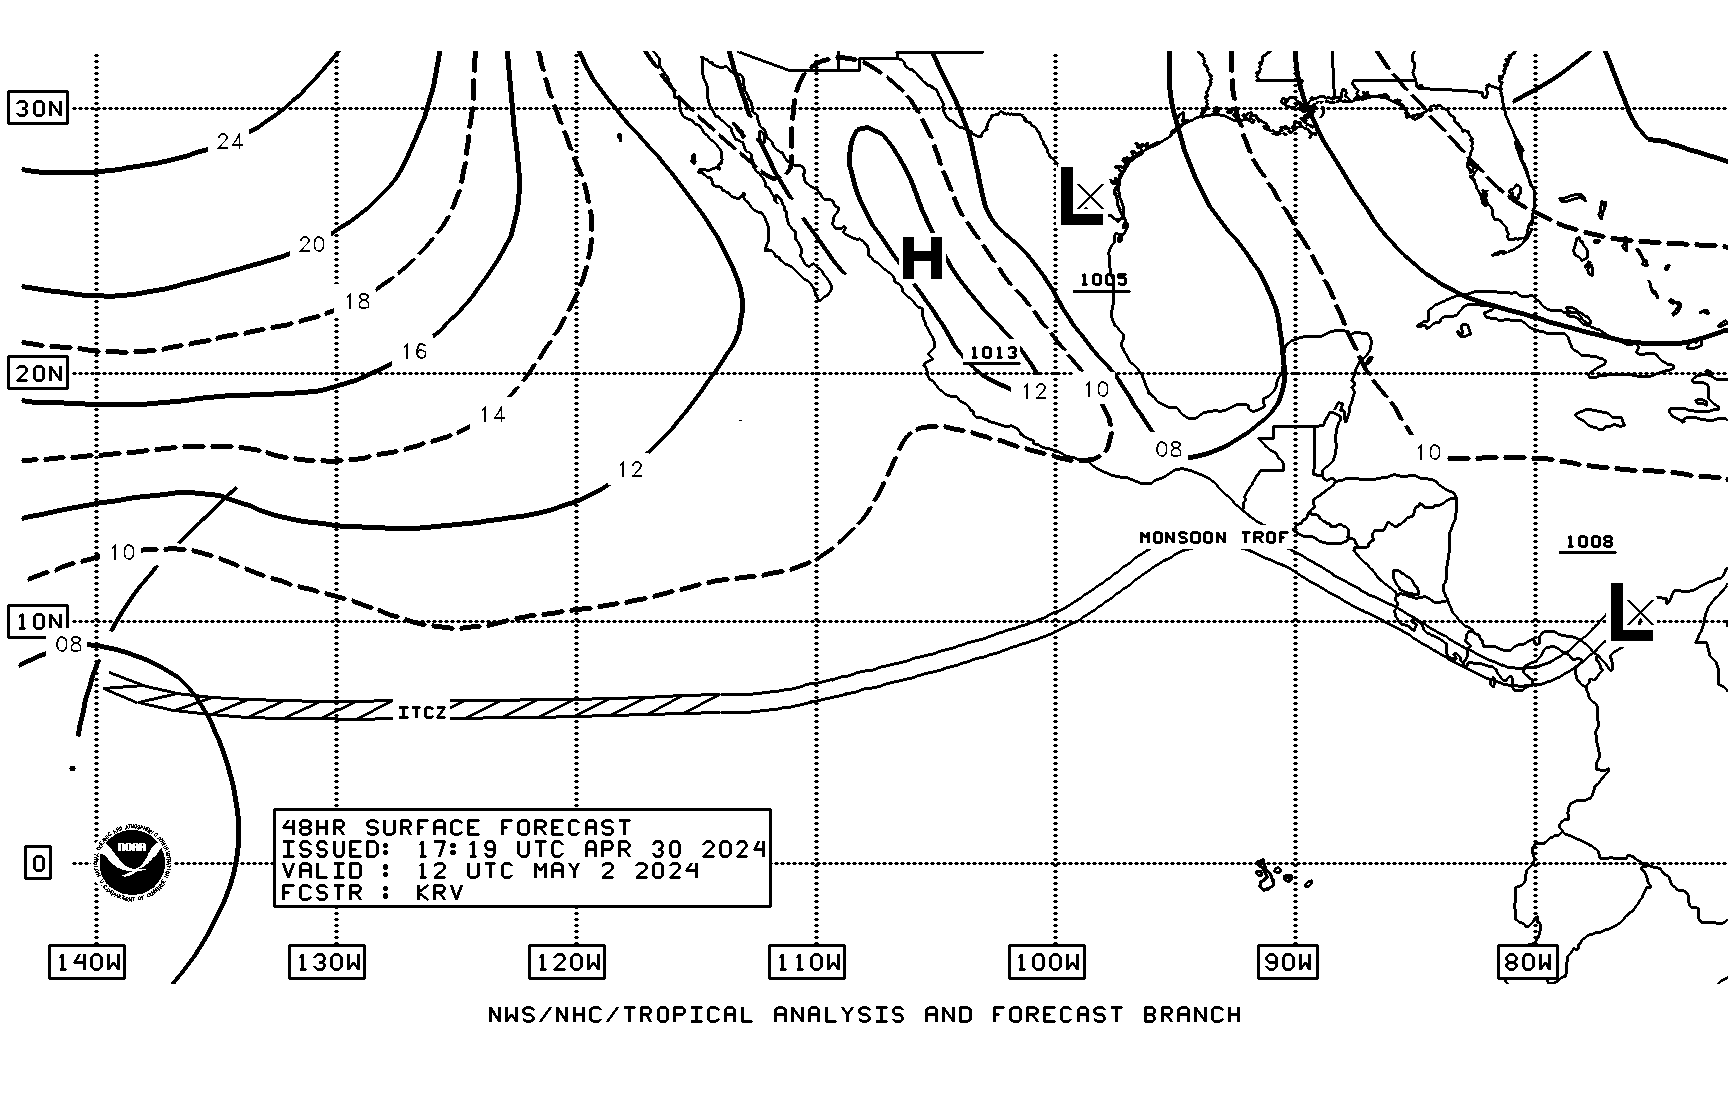 48 hour SE Pacific surface